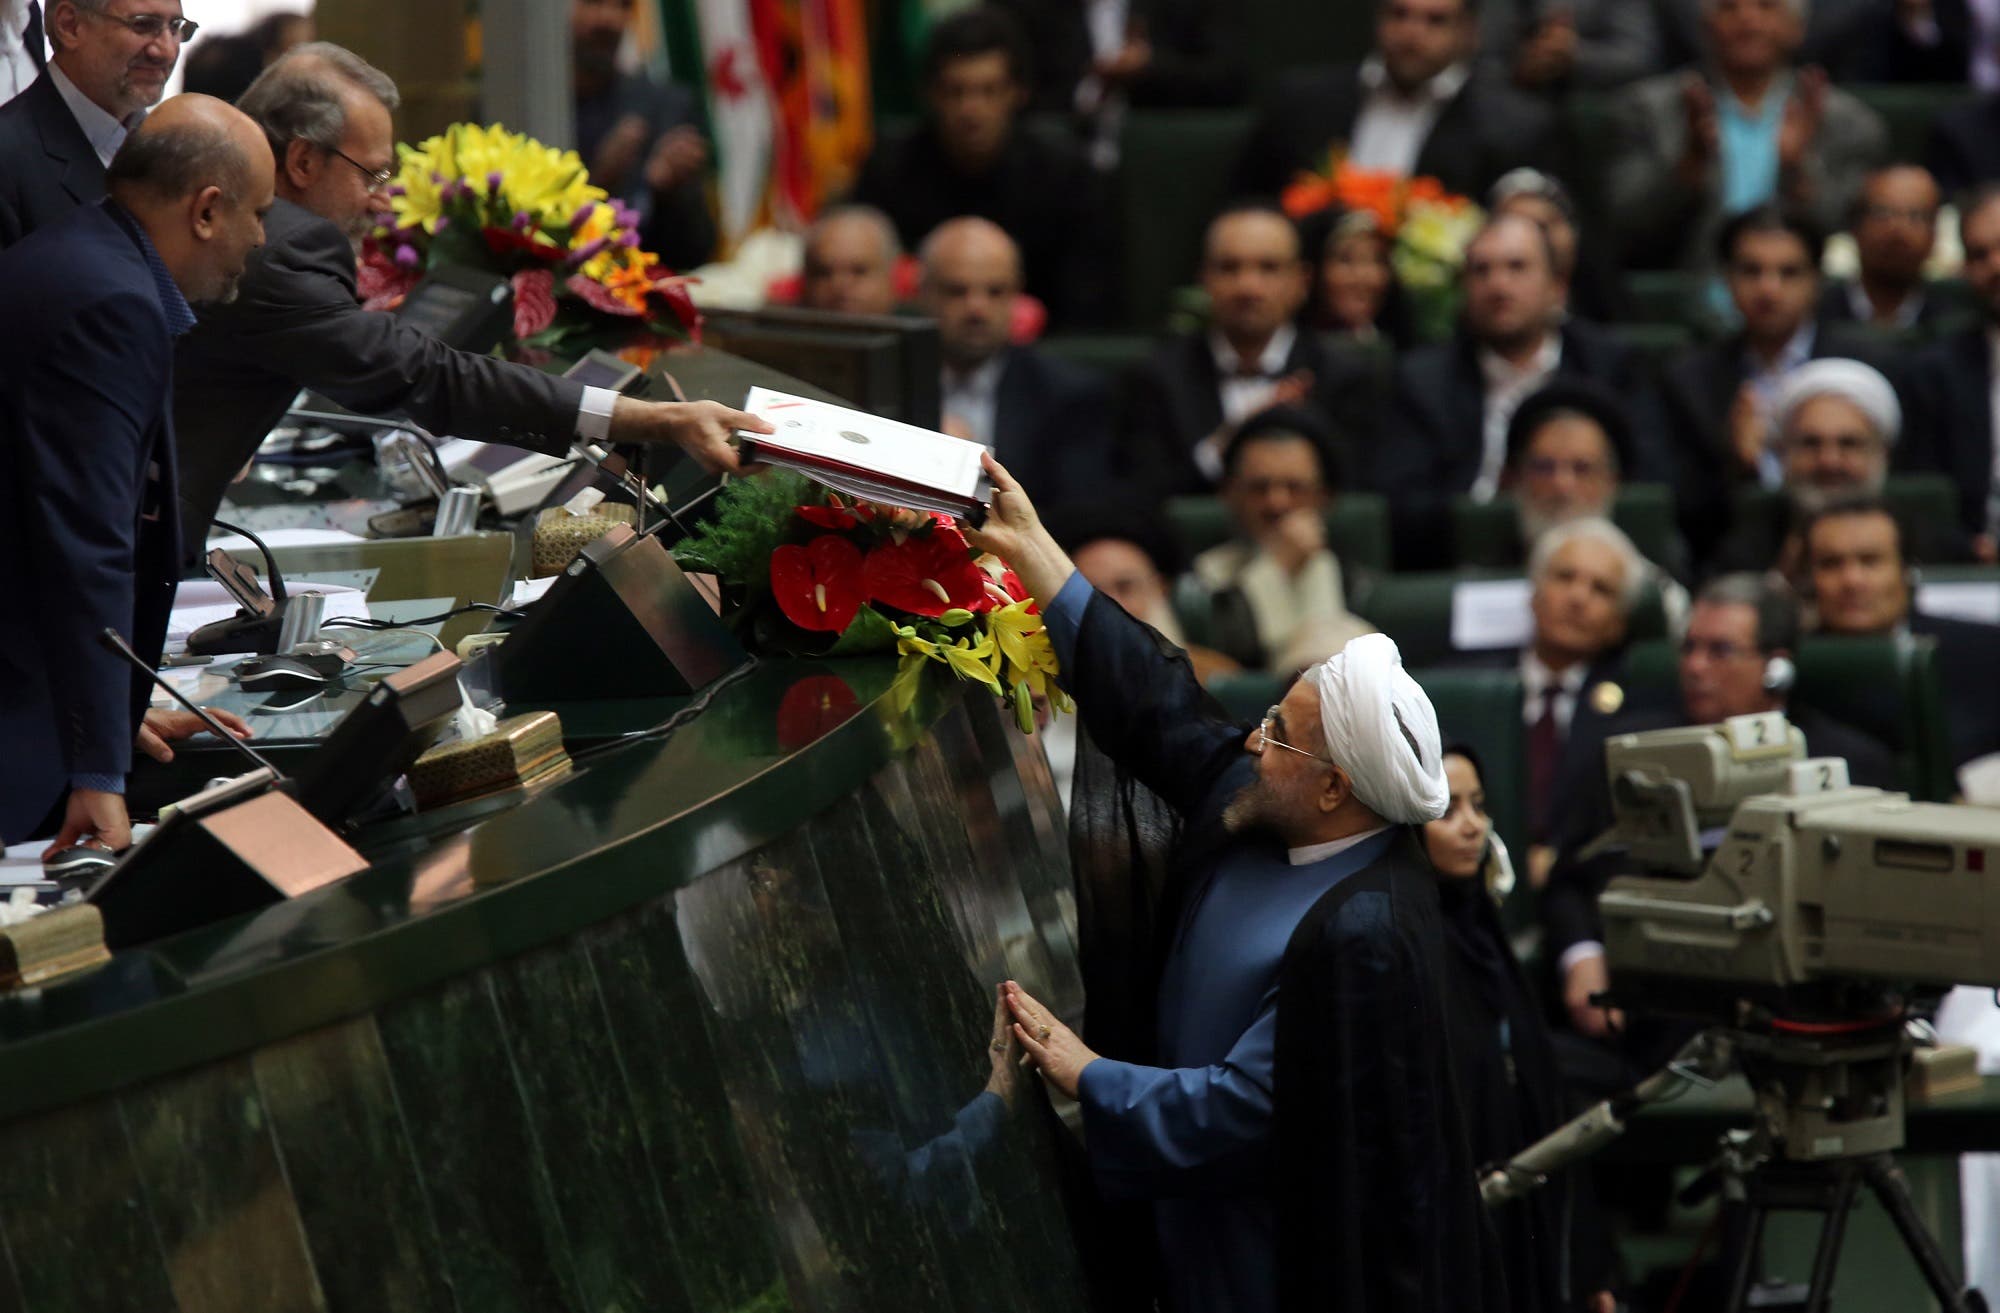 Hasan Rowhani delivering his cabinet list to Parliament Speaker Ali Larijani after he was sworn in before parliament in Tehran on August 4, 2013. (AFP)